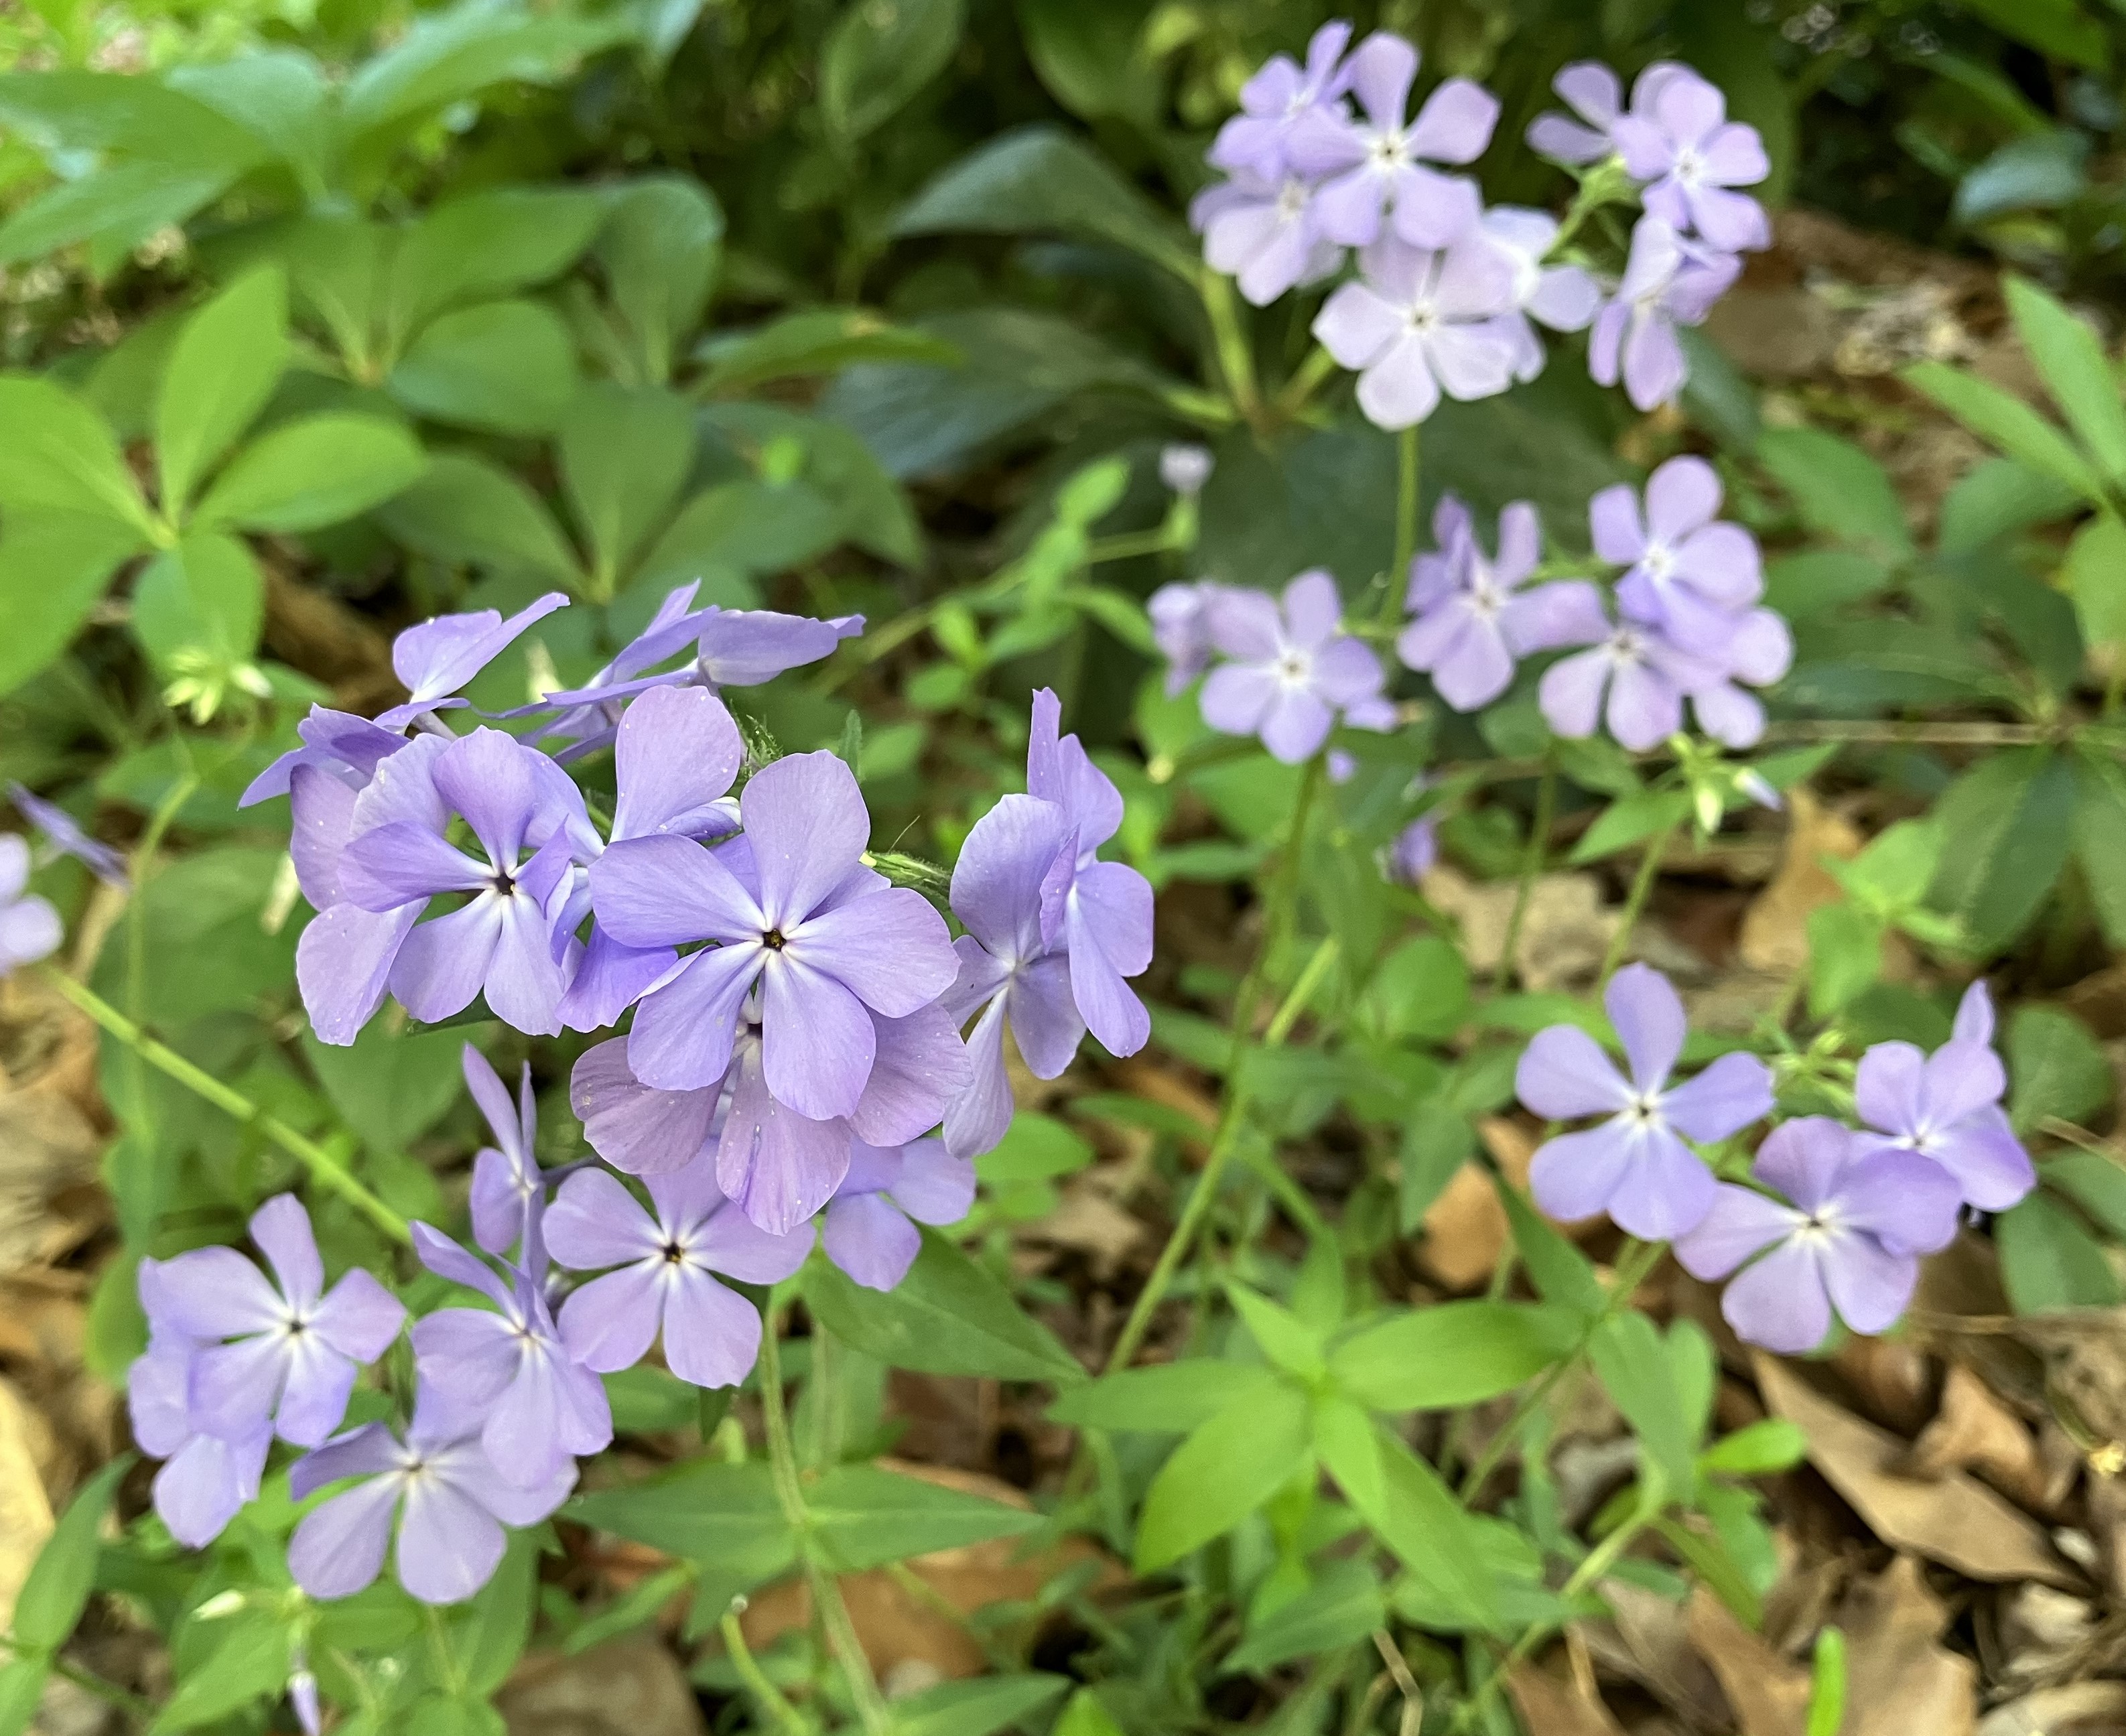 Violet flowers in small clusters